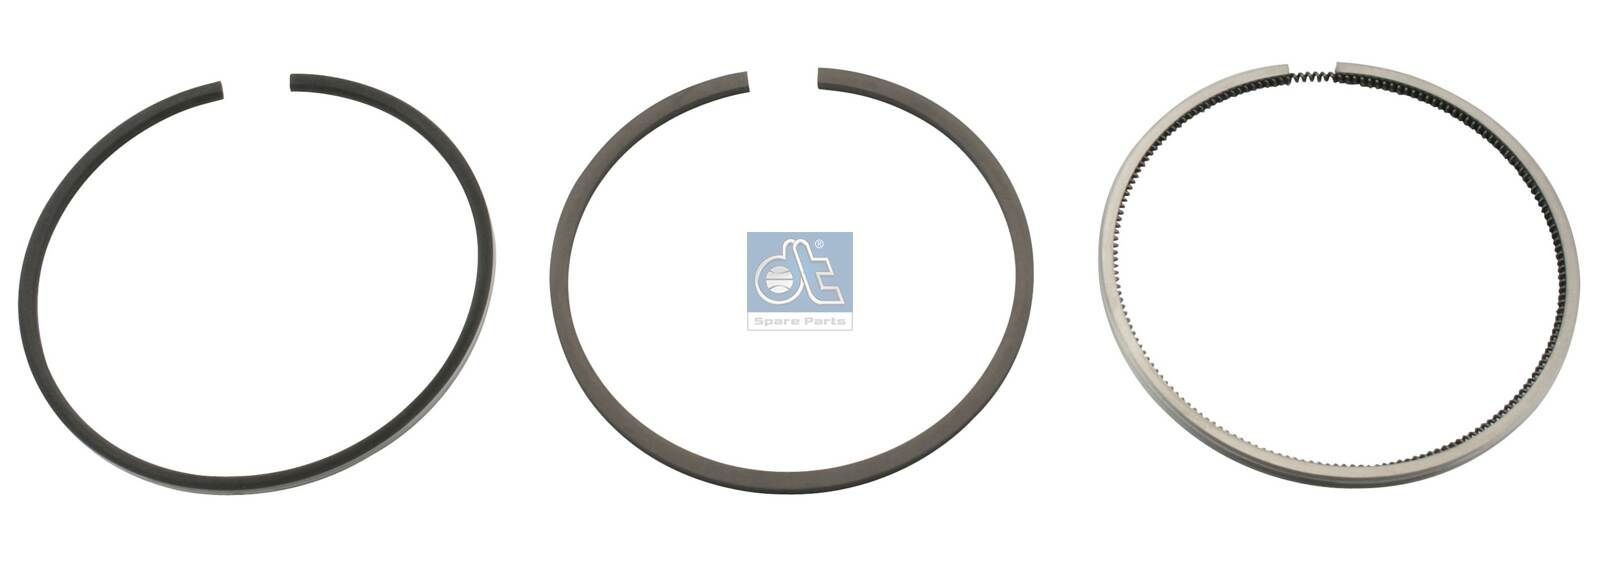 037 44 N0 DT Spare Parts 2.90082 Piston Ring Kit 465343